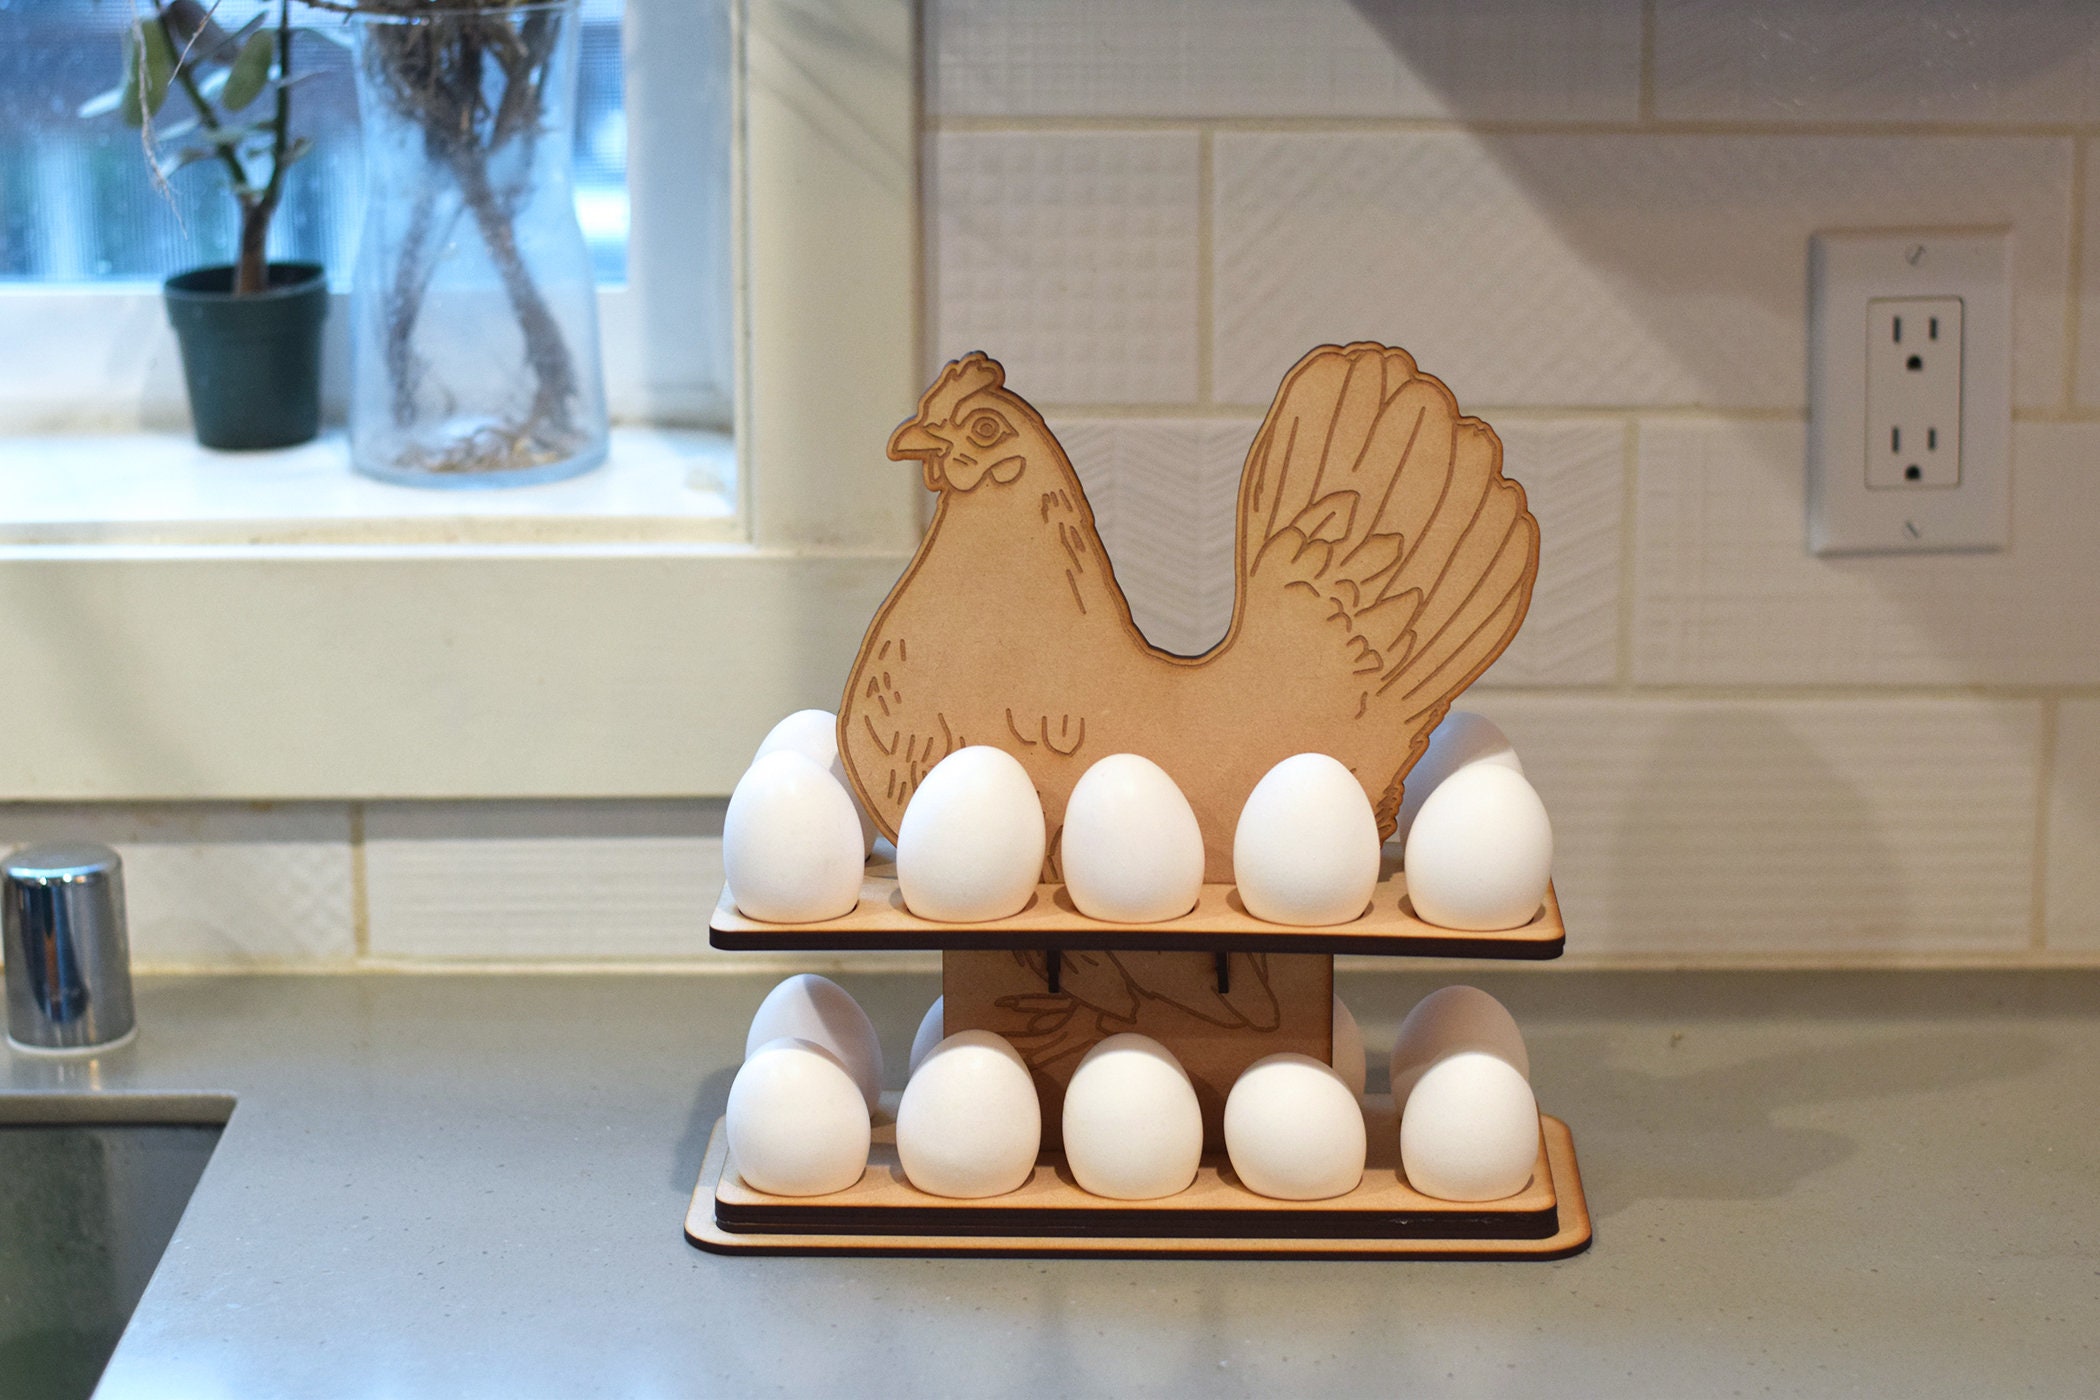 Personalized Wooden Chicken-shaped Egg Holder Storage & Display